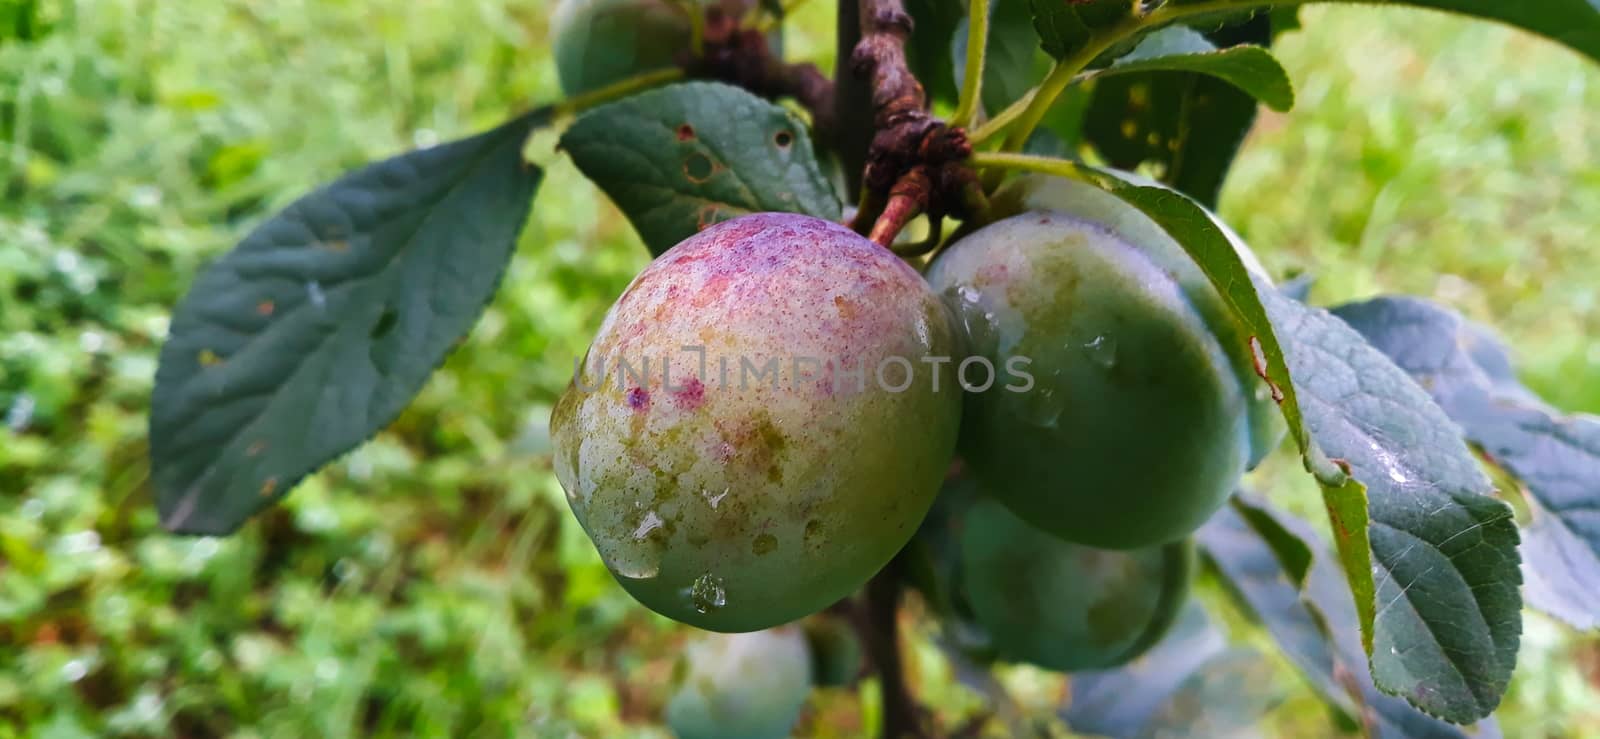 Banner, close up, green plums that have started to get color with water droplets on them. Zavidovici, Bosnia and Herzegovina.